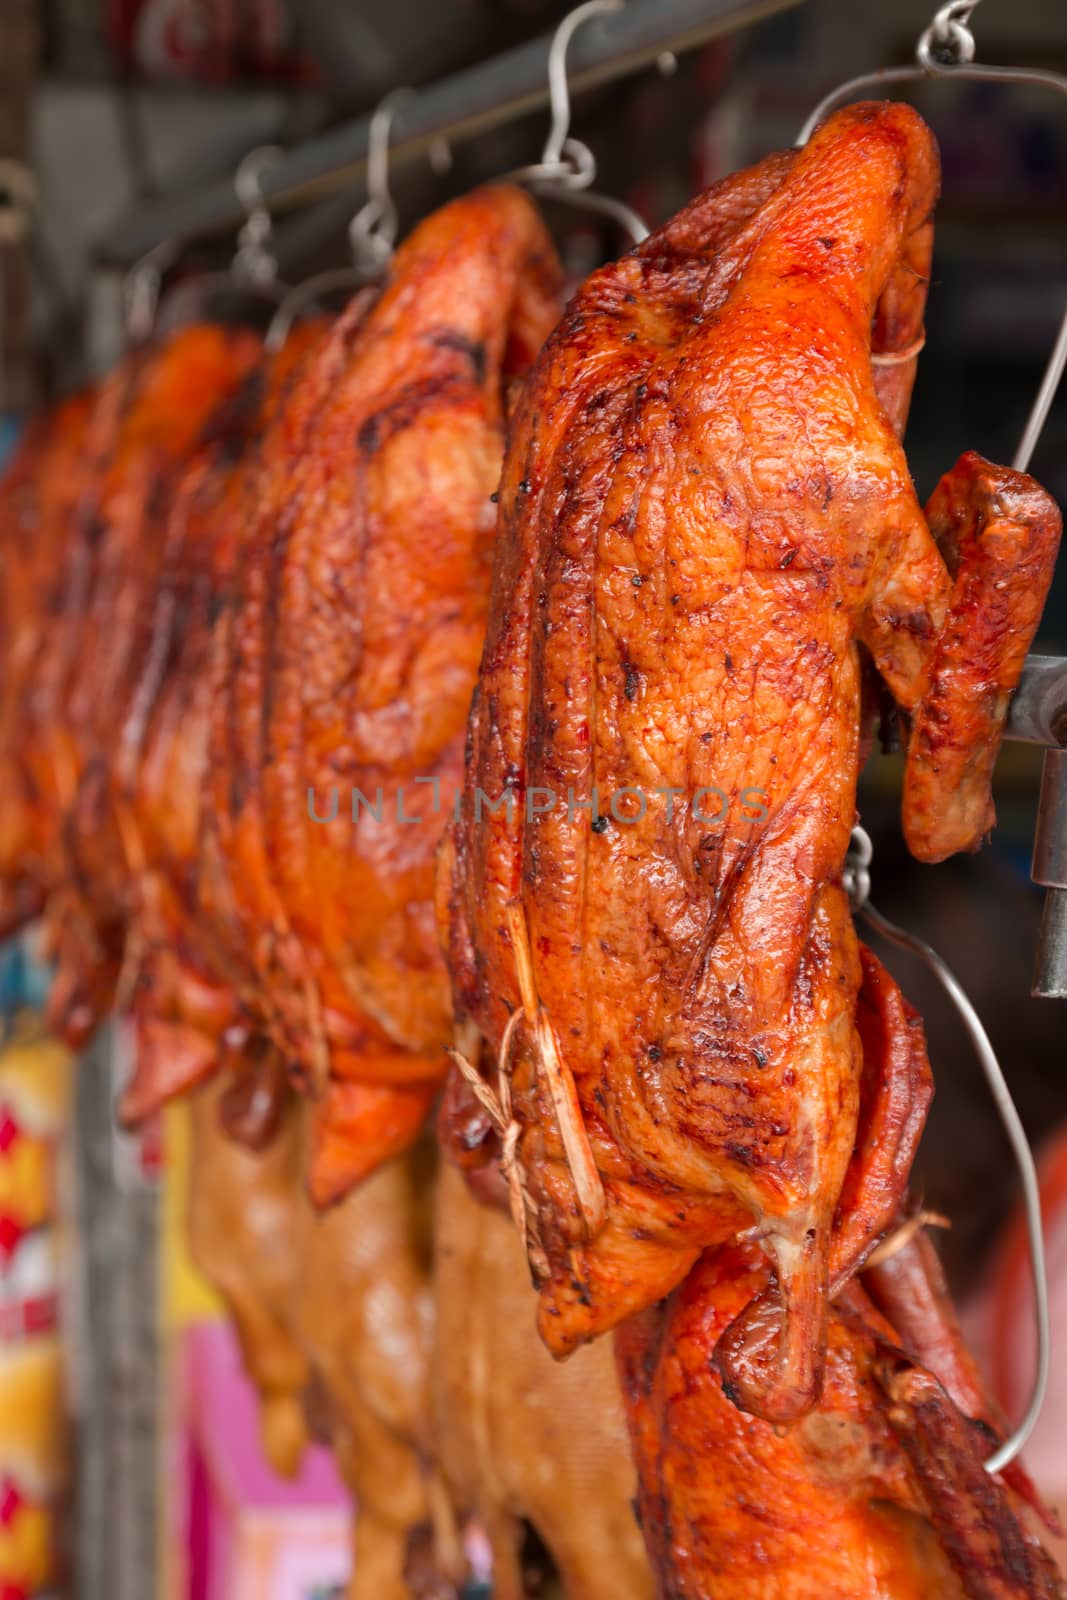 Roasted duck on the market, popular consumption in various festivals.